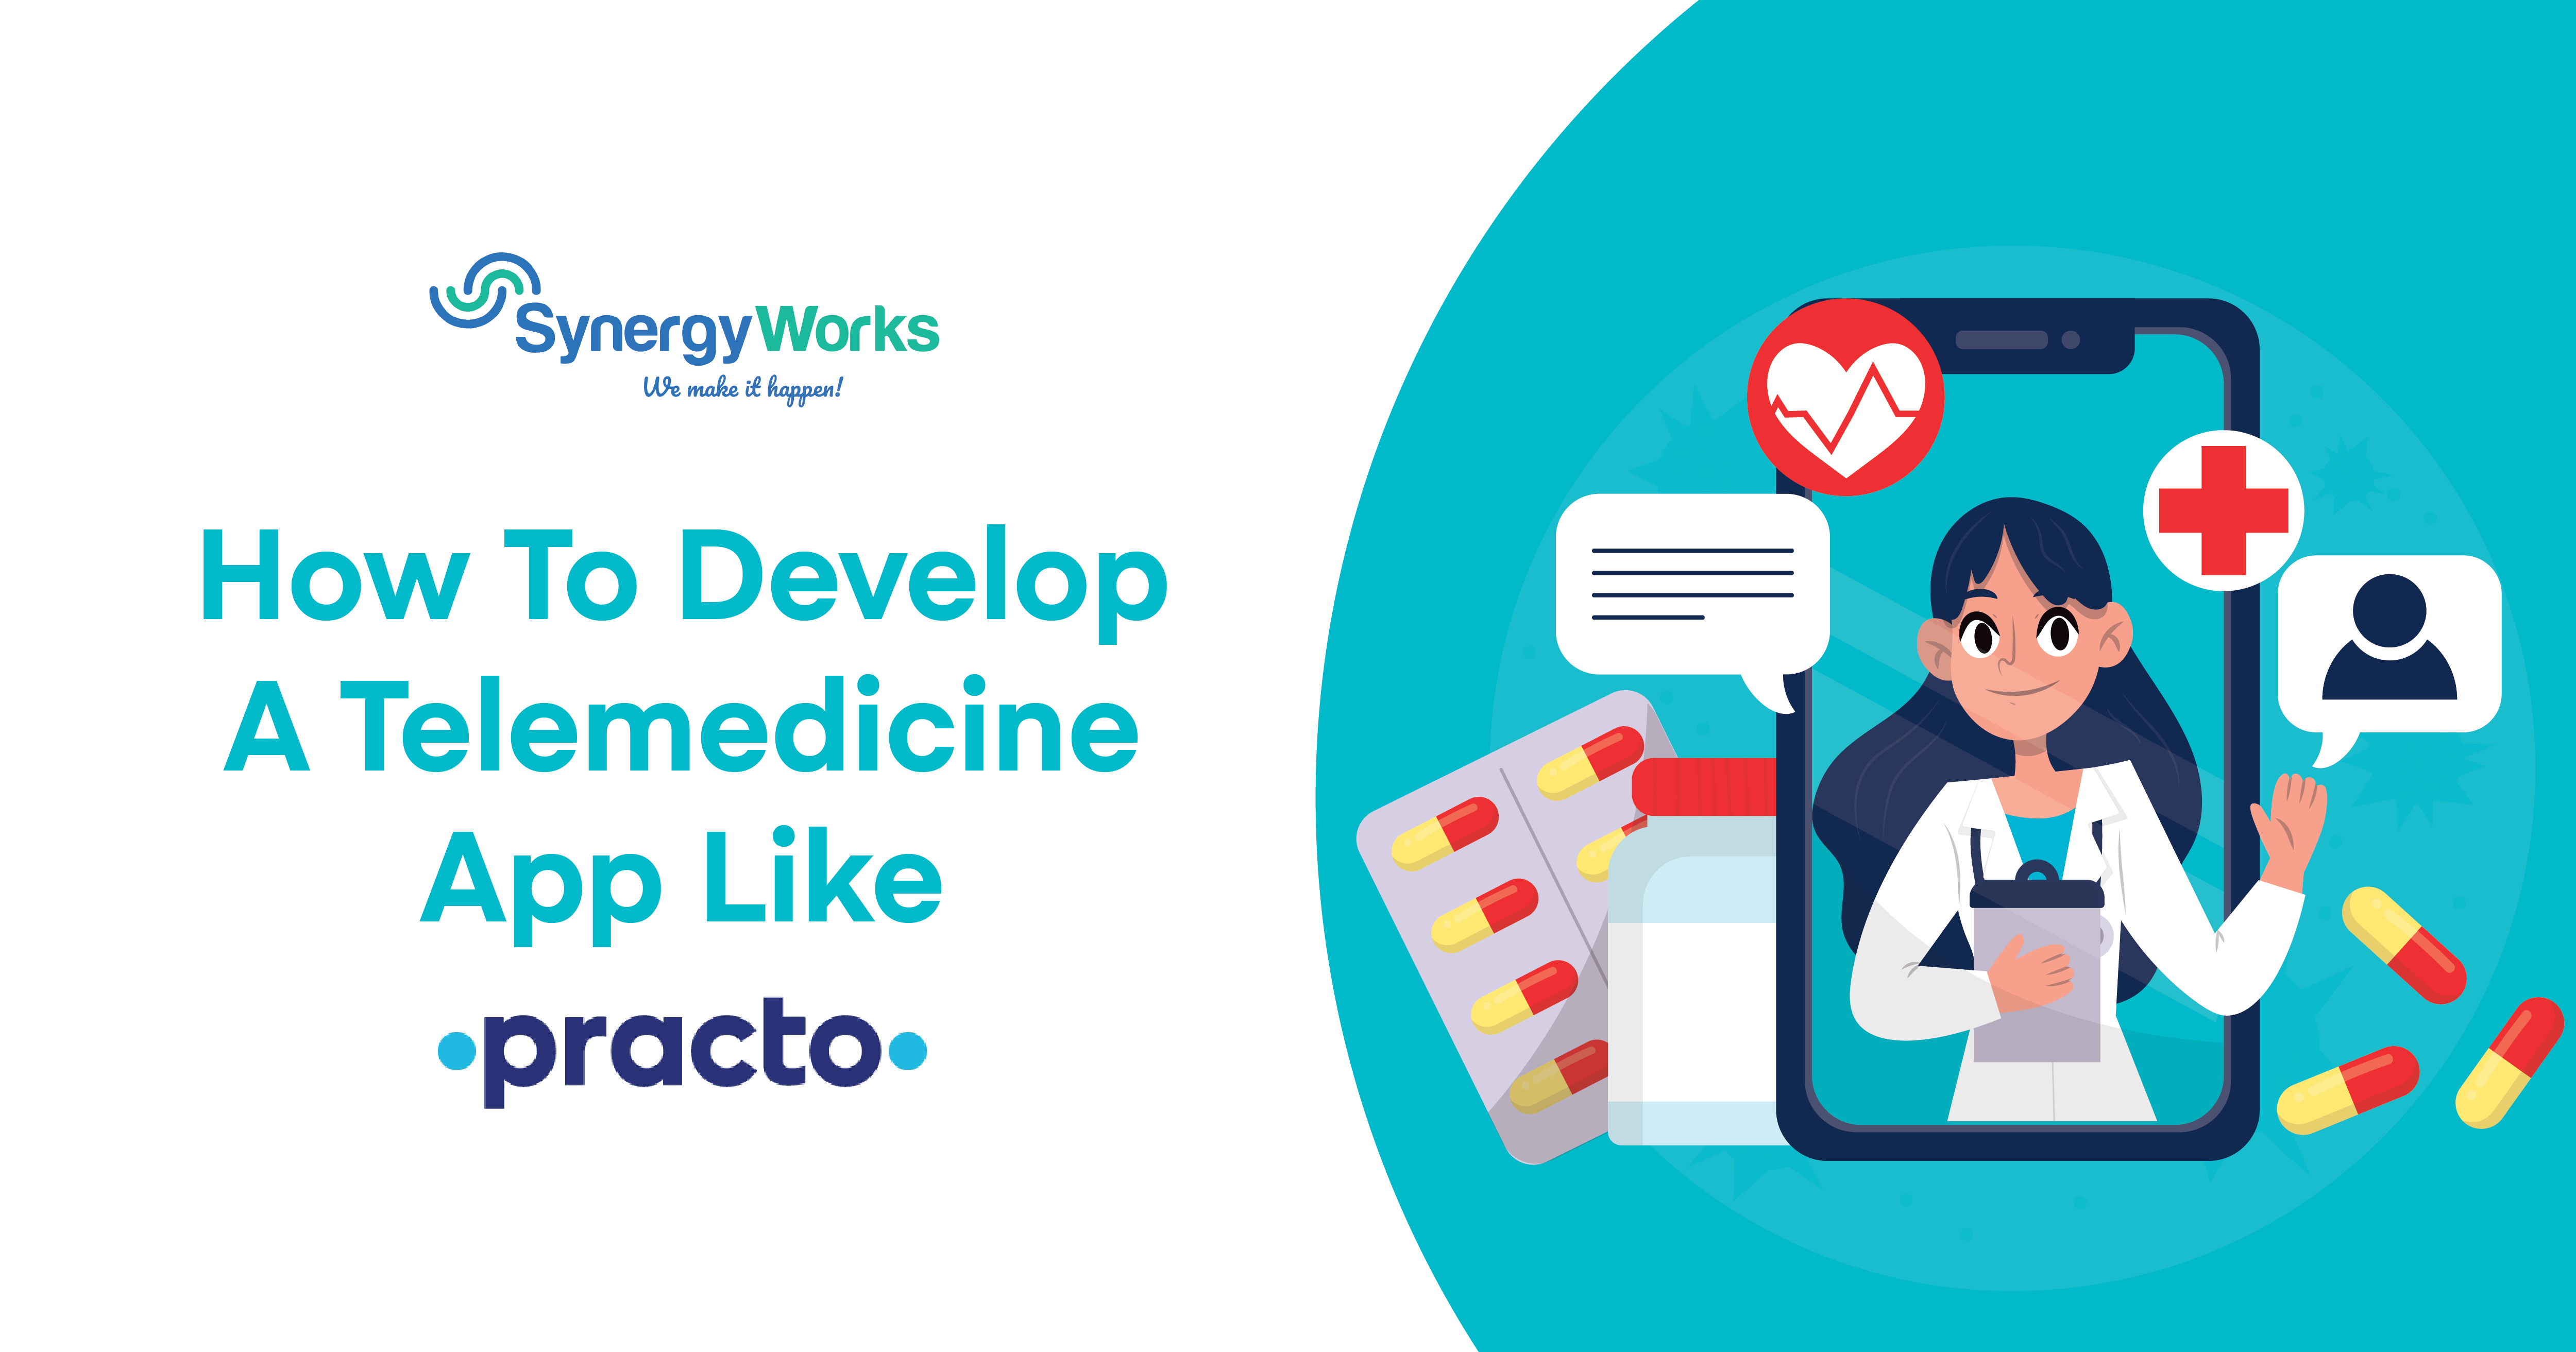 How To Develop A Telemedicine App Like Practo